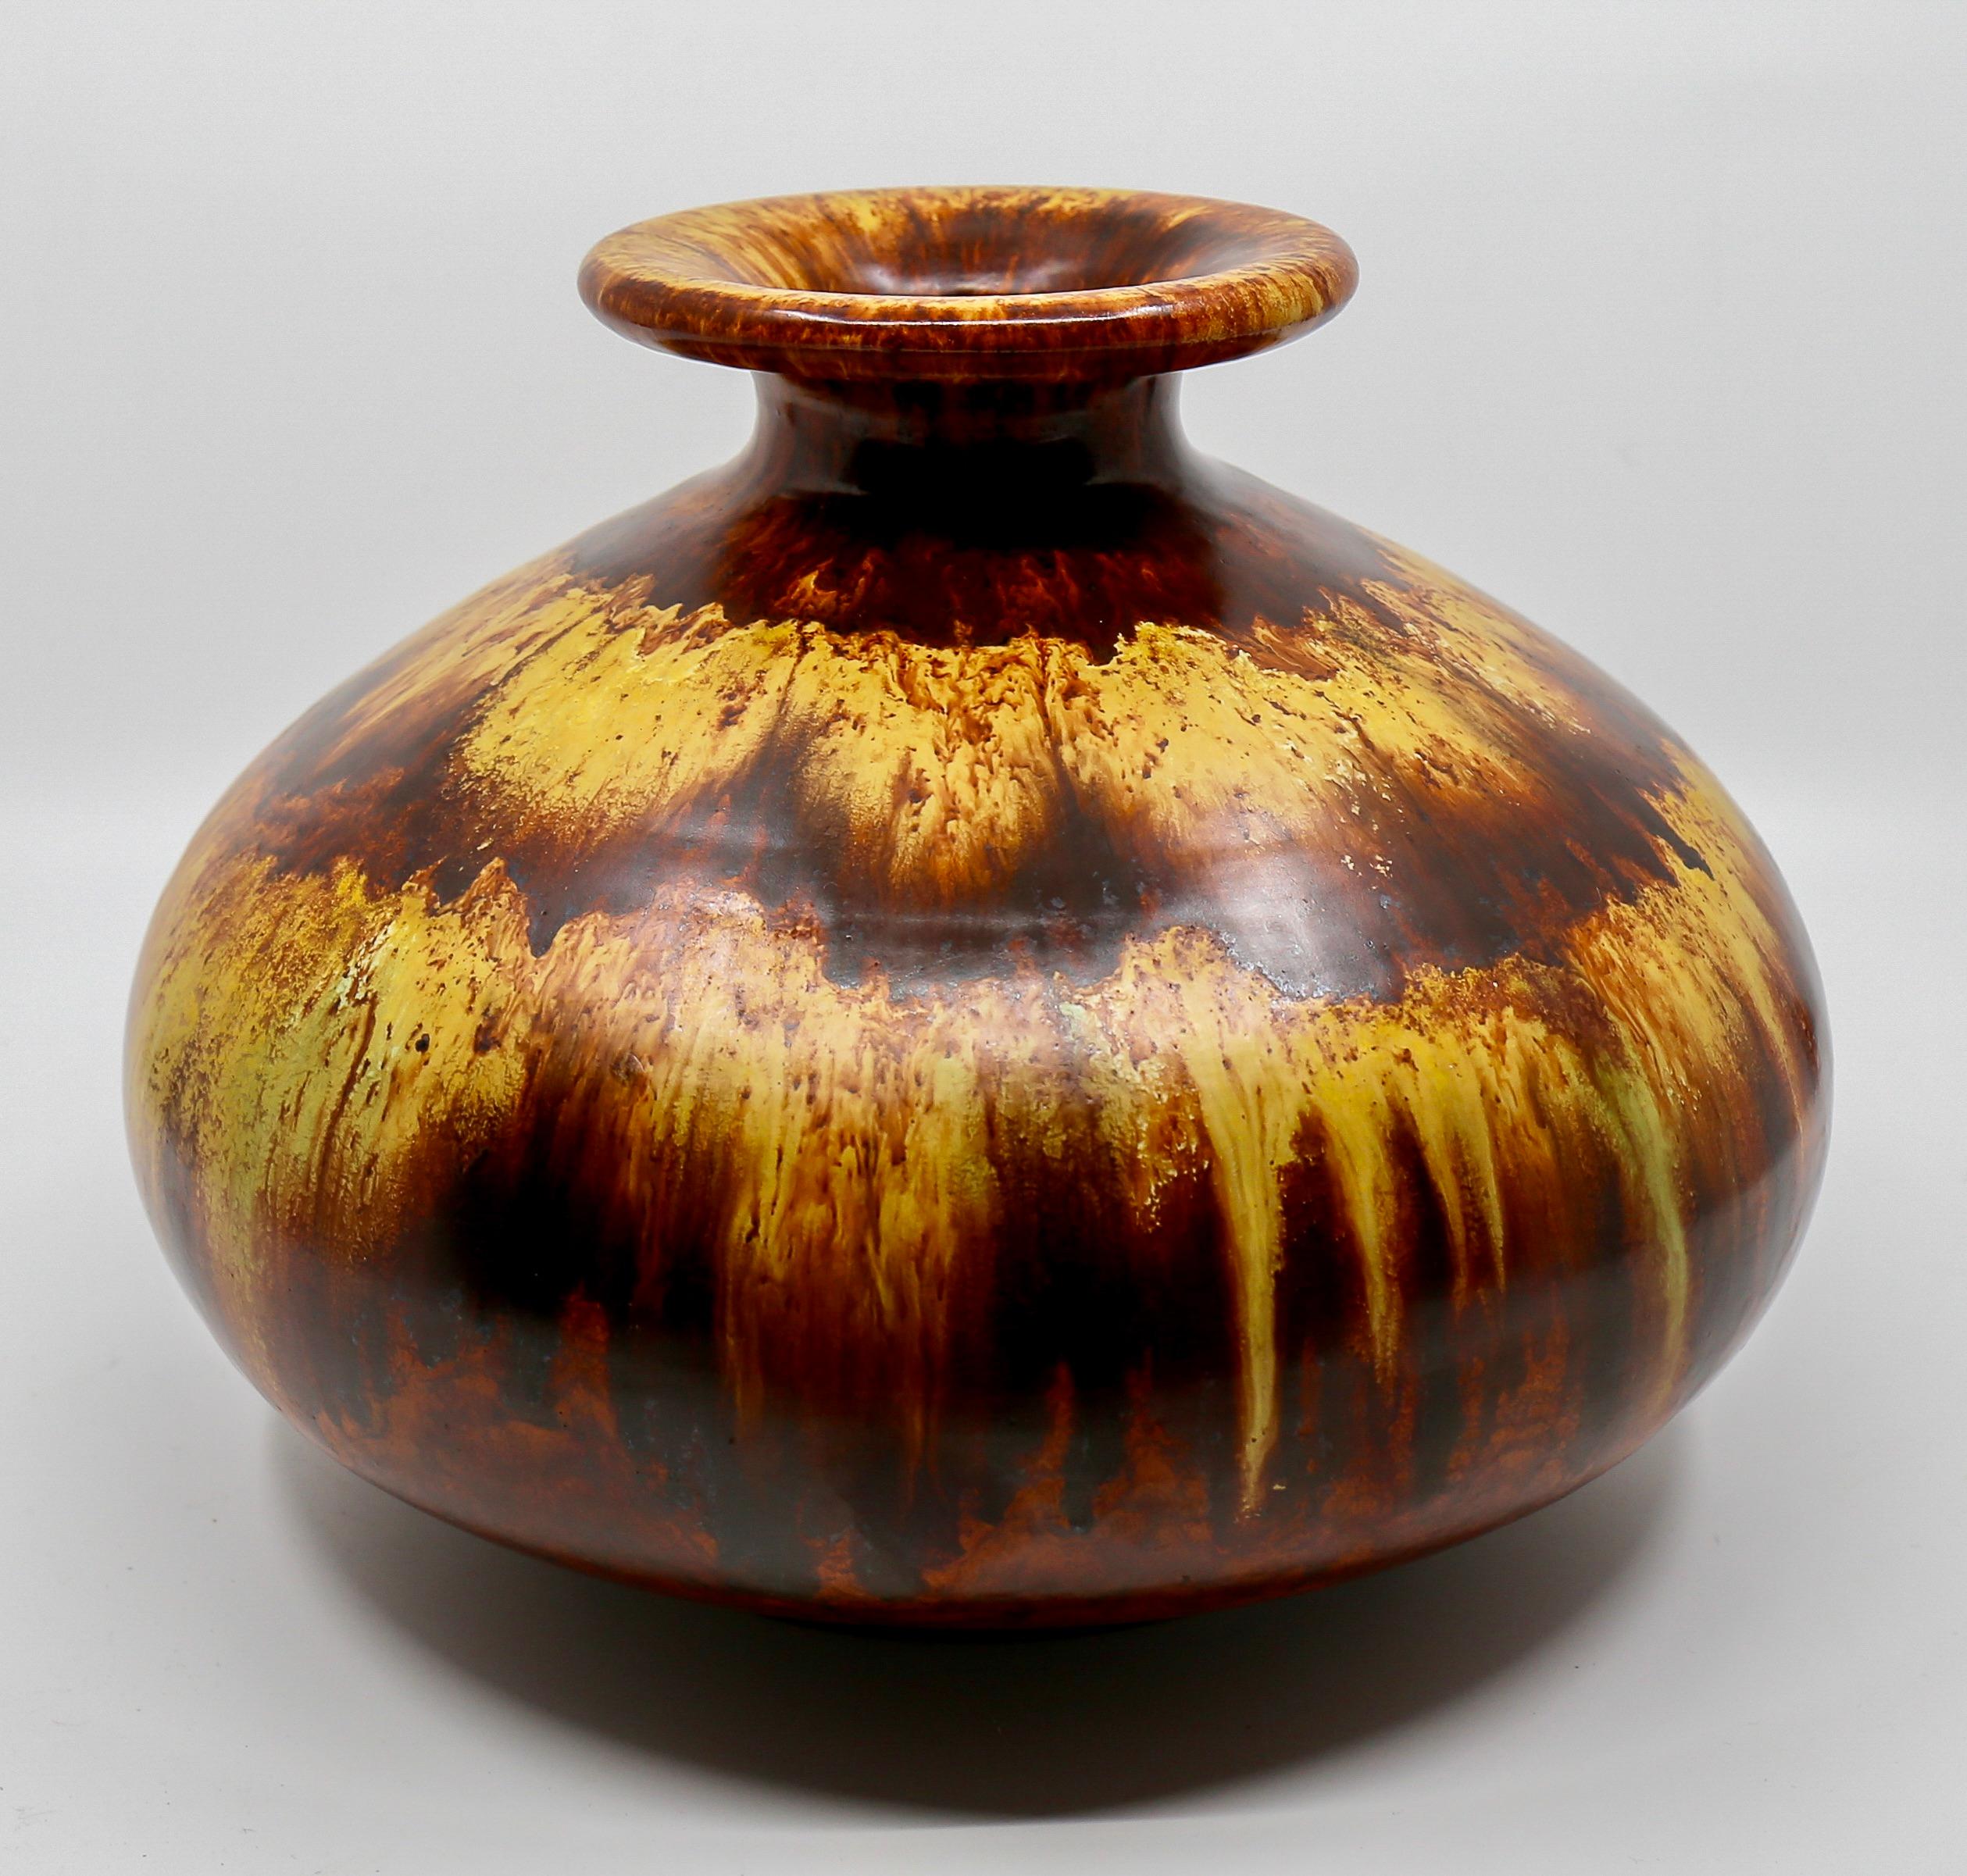 Beautiful spherical vase from the 1970s

Warm yellow and brown tones in a running glaze flow into a dark brown.
Good vintage condition, no chips. There are glaze defects on the bottom and on the inner edge of the opening.

Height; 19 cm, diameter;